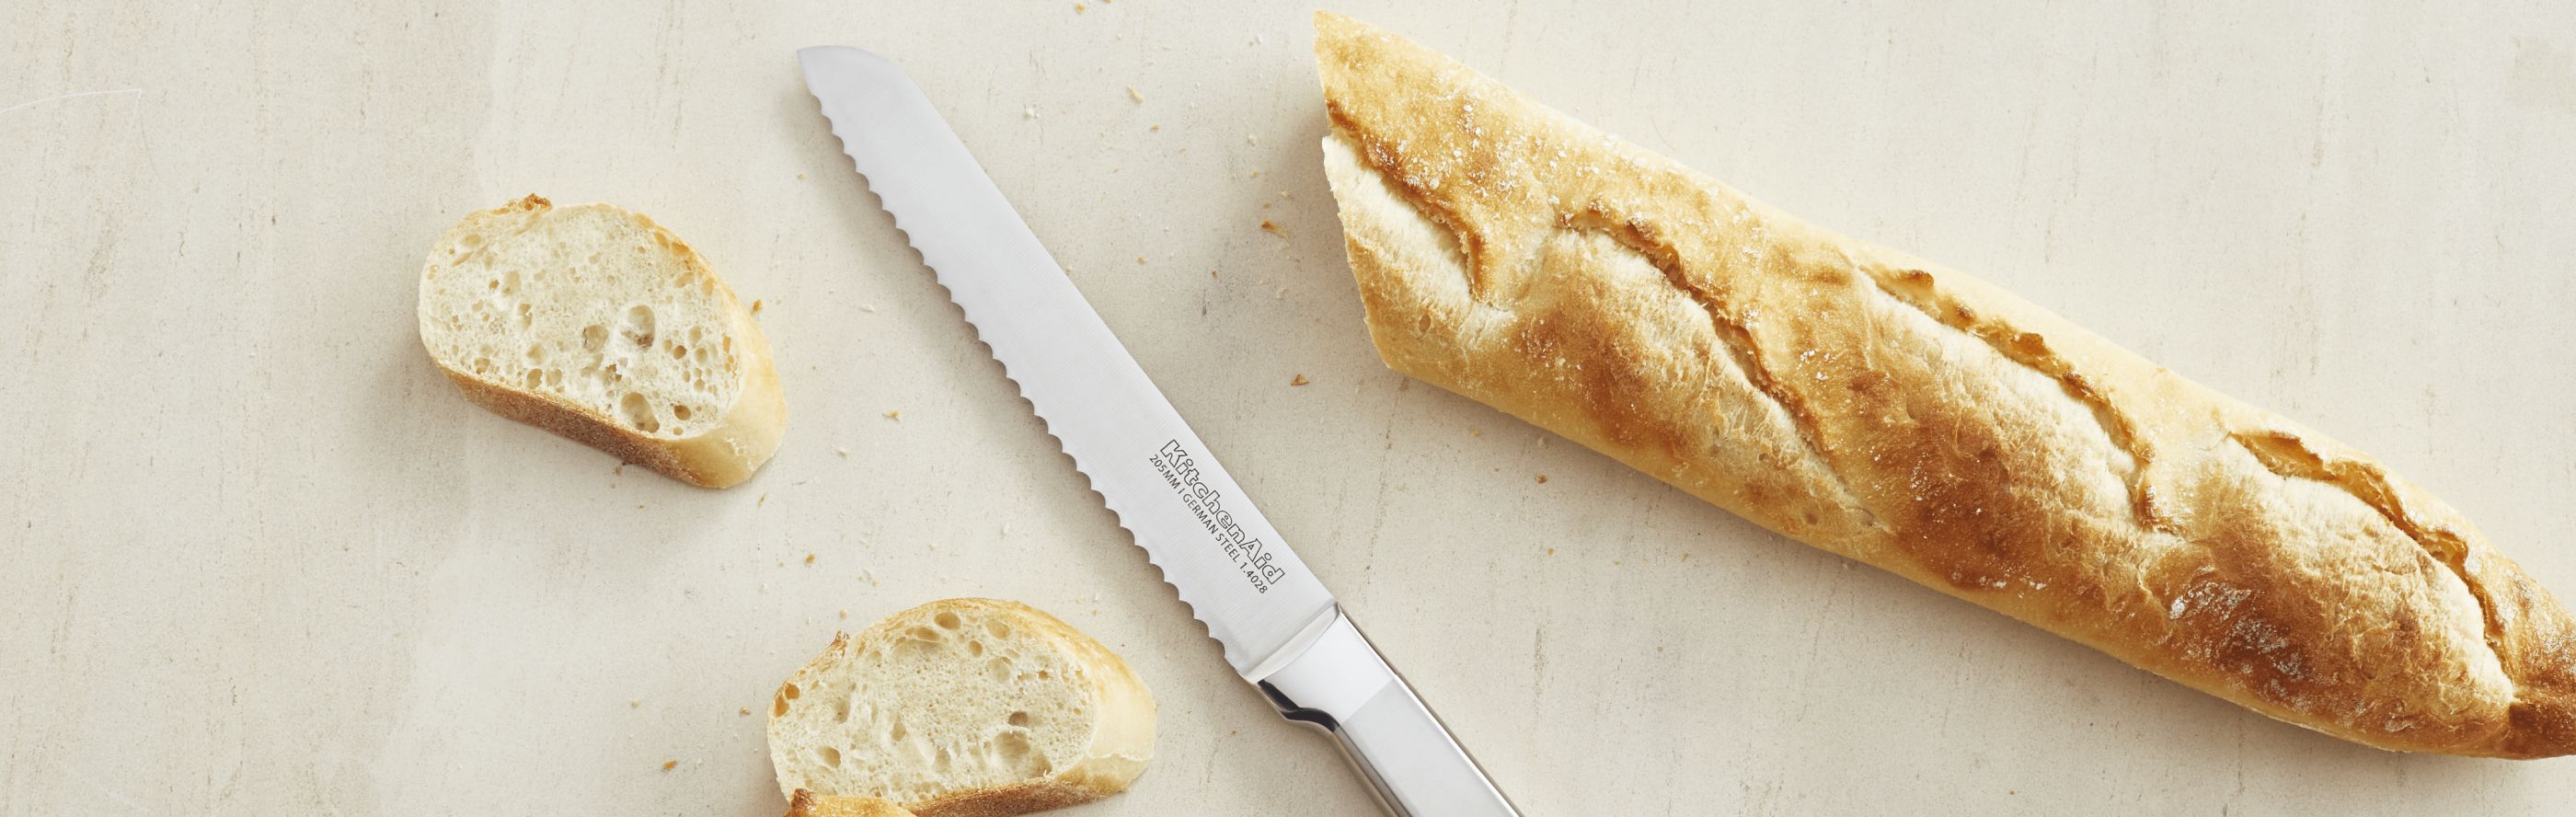 A KitchenAid® knife next to a loaf of bread.